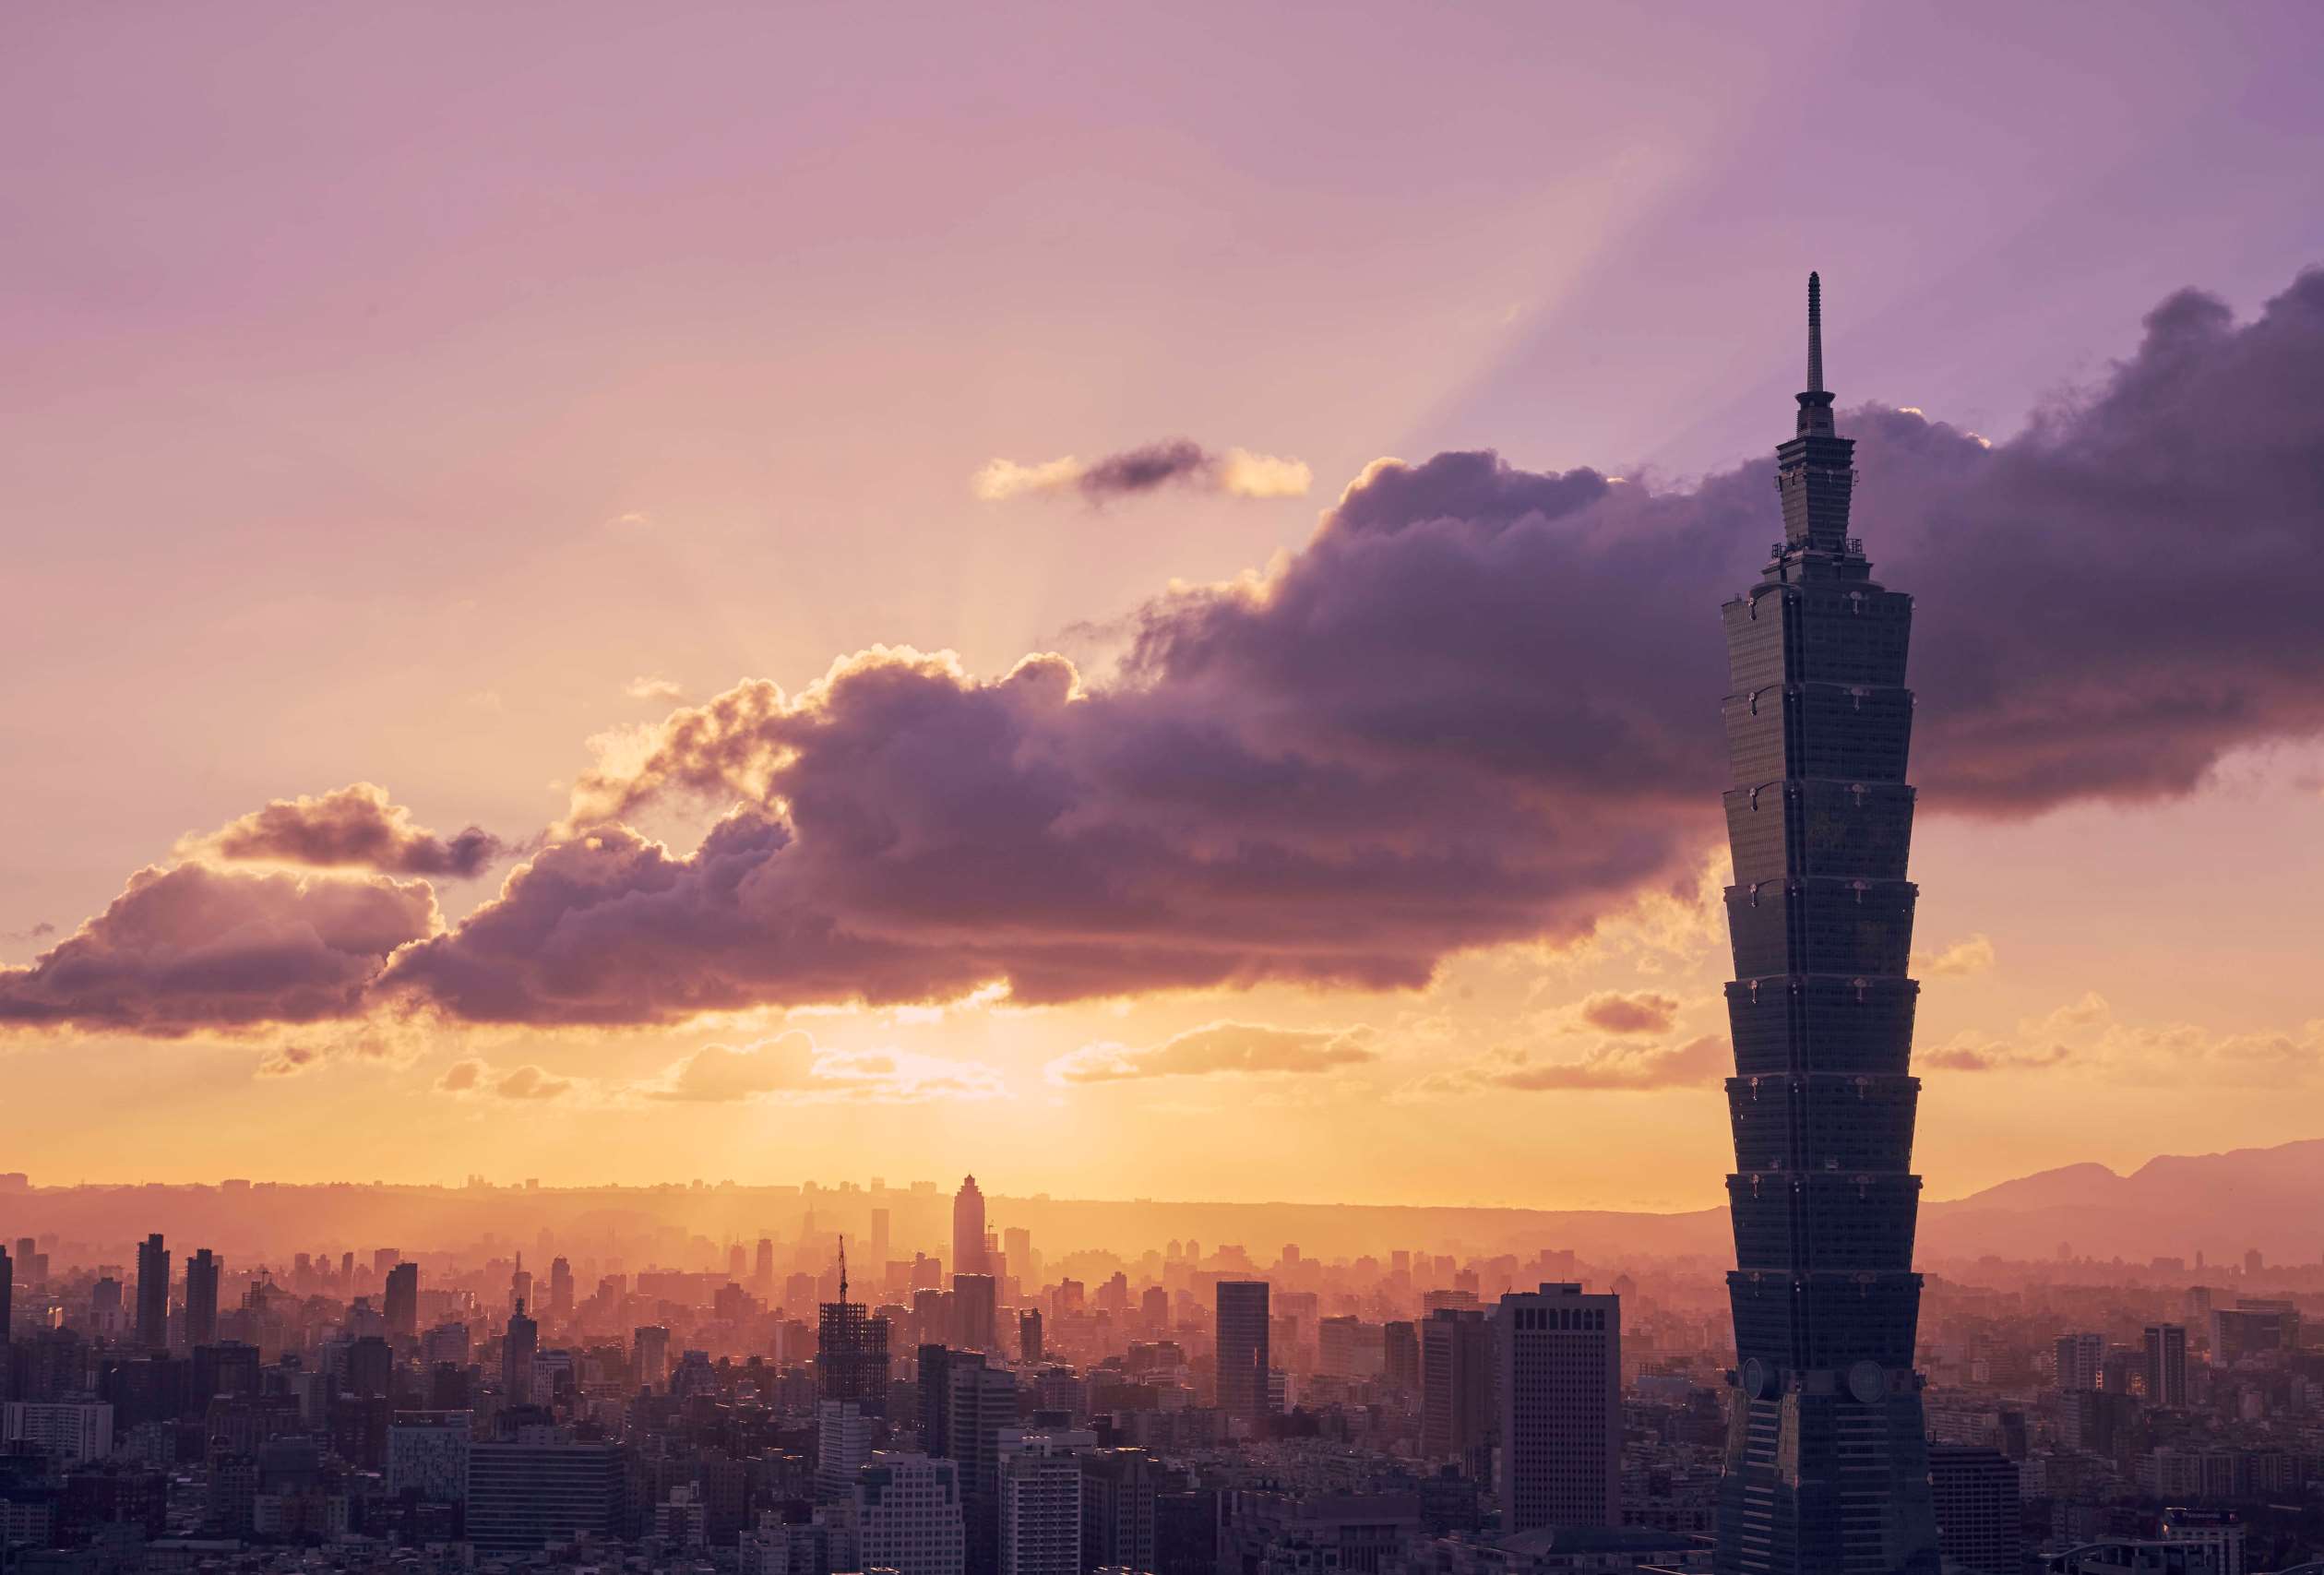 TAIPEI, TAIWAN - 2016/07/31: Taipei 101 dominates the view as the sun sets over the city.The Elephant Mountain hiking trail is the closest viewpoint to the iconic building and attracts photographers and tourists whenever there's a chance of a nice sunset.